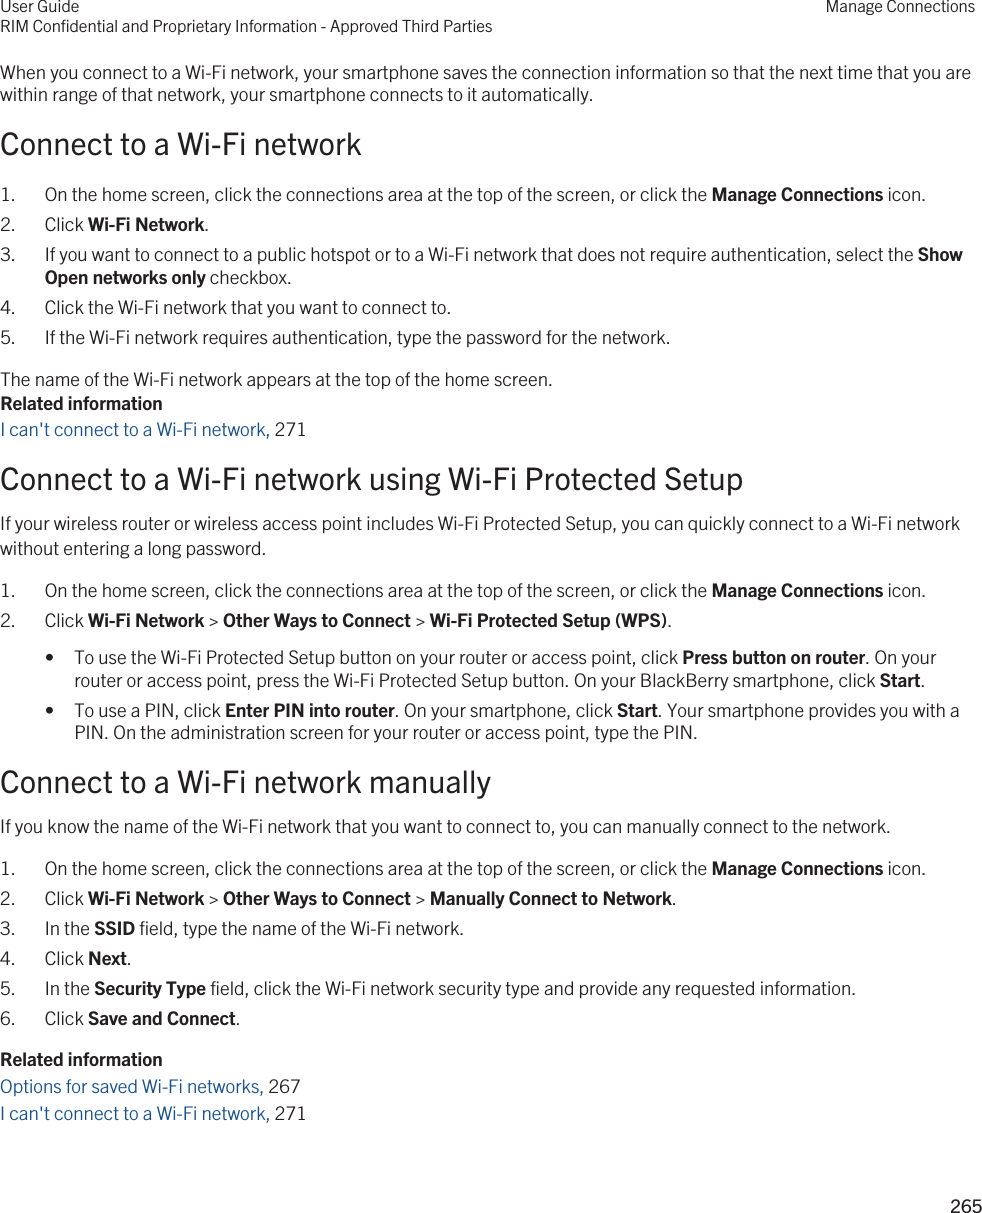 When you connect to a Wi-Fi network, your smartphone saves the connection information so that the next time that you are within range of that network, your smartphone connects to it automatically.Connect to a Wi-Fi network1. On the home screen, click the connections area at the top of the screen, or click the Manage Connections icon.2. Click Wi-Fi Network.3. If you want to connect to a public hotspot or to a Wi-Fi network that does not require authentication, select the Show Open networks only checkbox.4. Click the Wi-Fi network that you want to connect to.5. If the Wi-Fi network requires authentication, type the password for the network.The name of the Wi-Fi network appears at the top of the home screen.Related informationI can&apos;t connect to a Wi-Fi network, 271Connect to a Wi-Fi network using Wi-Fi Protected SetupIf your wireless router or wireless access point includes Wi-Fi Protected Setup, you can quickly connect to a Wi-Fi network without entering a long password.1. On the home screen, click the connections area at the top of the screen, or click the Manage Connections icon.2. Click Wi-Fi Network &gt; Other Ways to Connect &gt; Wi-Fi Protected Setup (WPS).• To use the Wi-Fi Protected Setup button on your router or access point, click Press button on router. On your router or access point, press the Wi-Fi Protected Setup button. On your BlackBerry smartphone, click Start.• To use a PIN, click Enter PIN into router. On your smartphone, click Start. Your smartphone provides you with a PIN. On the administration screen for your router or access point, type the PIN.Connect to a Wi-Fi network manuallyIf you know the name of the Wi-Fi network that you want to connect to, you can manually connect to the network.1. On the home screen, click the connections area at the top of the screen, or click the Manage Connections icon.2. Click Wi-Fi Network &gt; Other Ways to Connect &gt; Manually Connect to Network.3. In the SSID field, type the name of the Wi-Fi network.4. Click Next.5. In the Security Type field, click the Wi-Fi network security type and provide any requested information.6. Click Save and Connect.Related informationOptions for saved Wi-Fi networks, 267I can&apos;t connect to a Wi-Fi network, 271User GuideRIM Confidential and Proprietary Information - Approved Third PartiesManage Connections265 